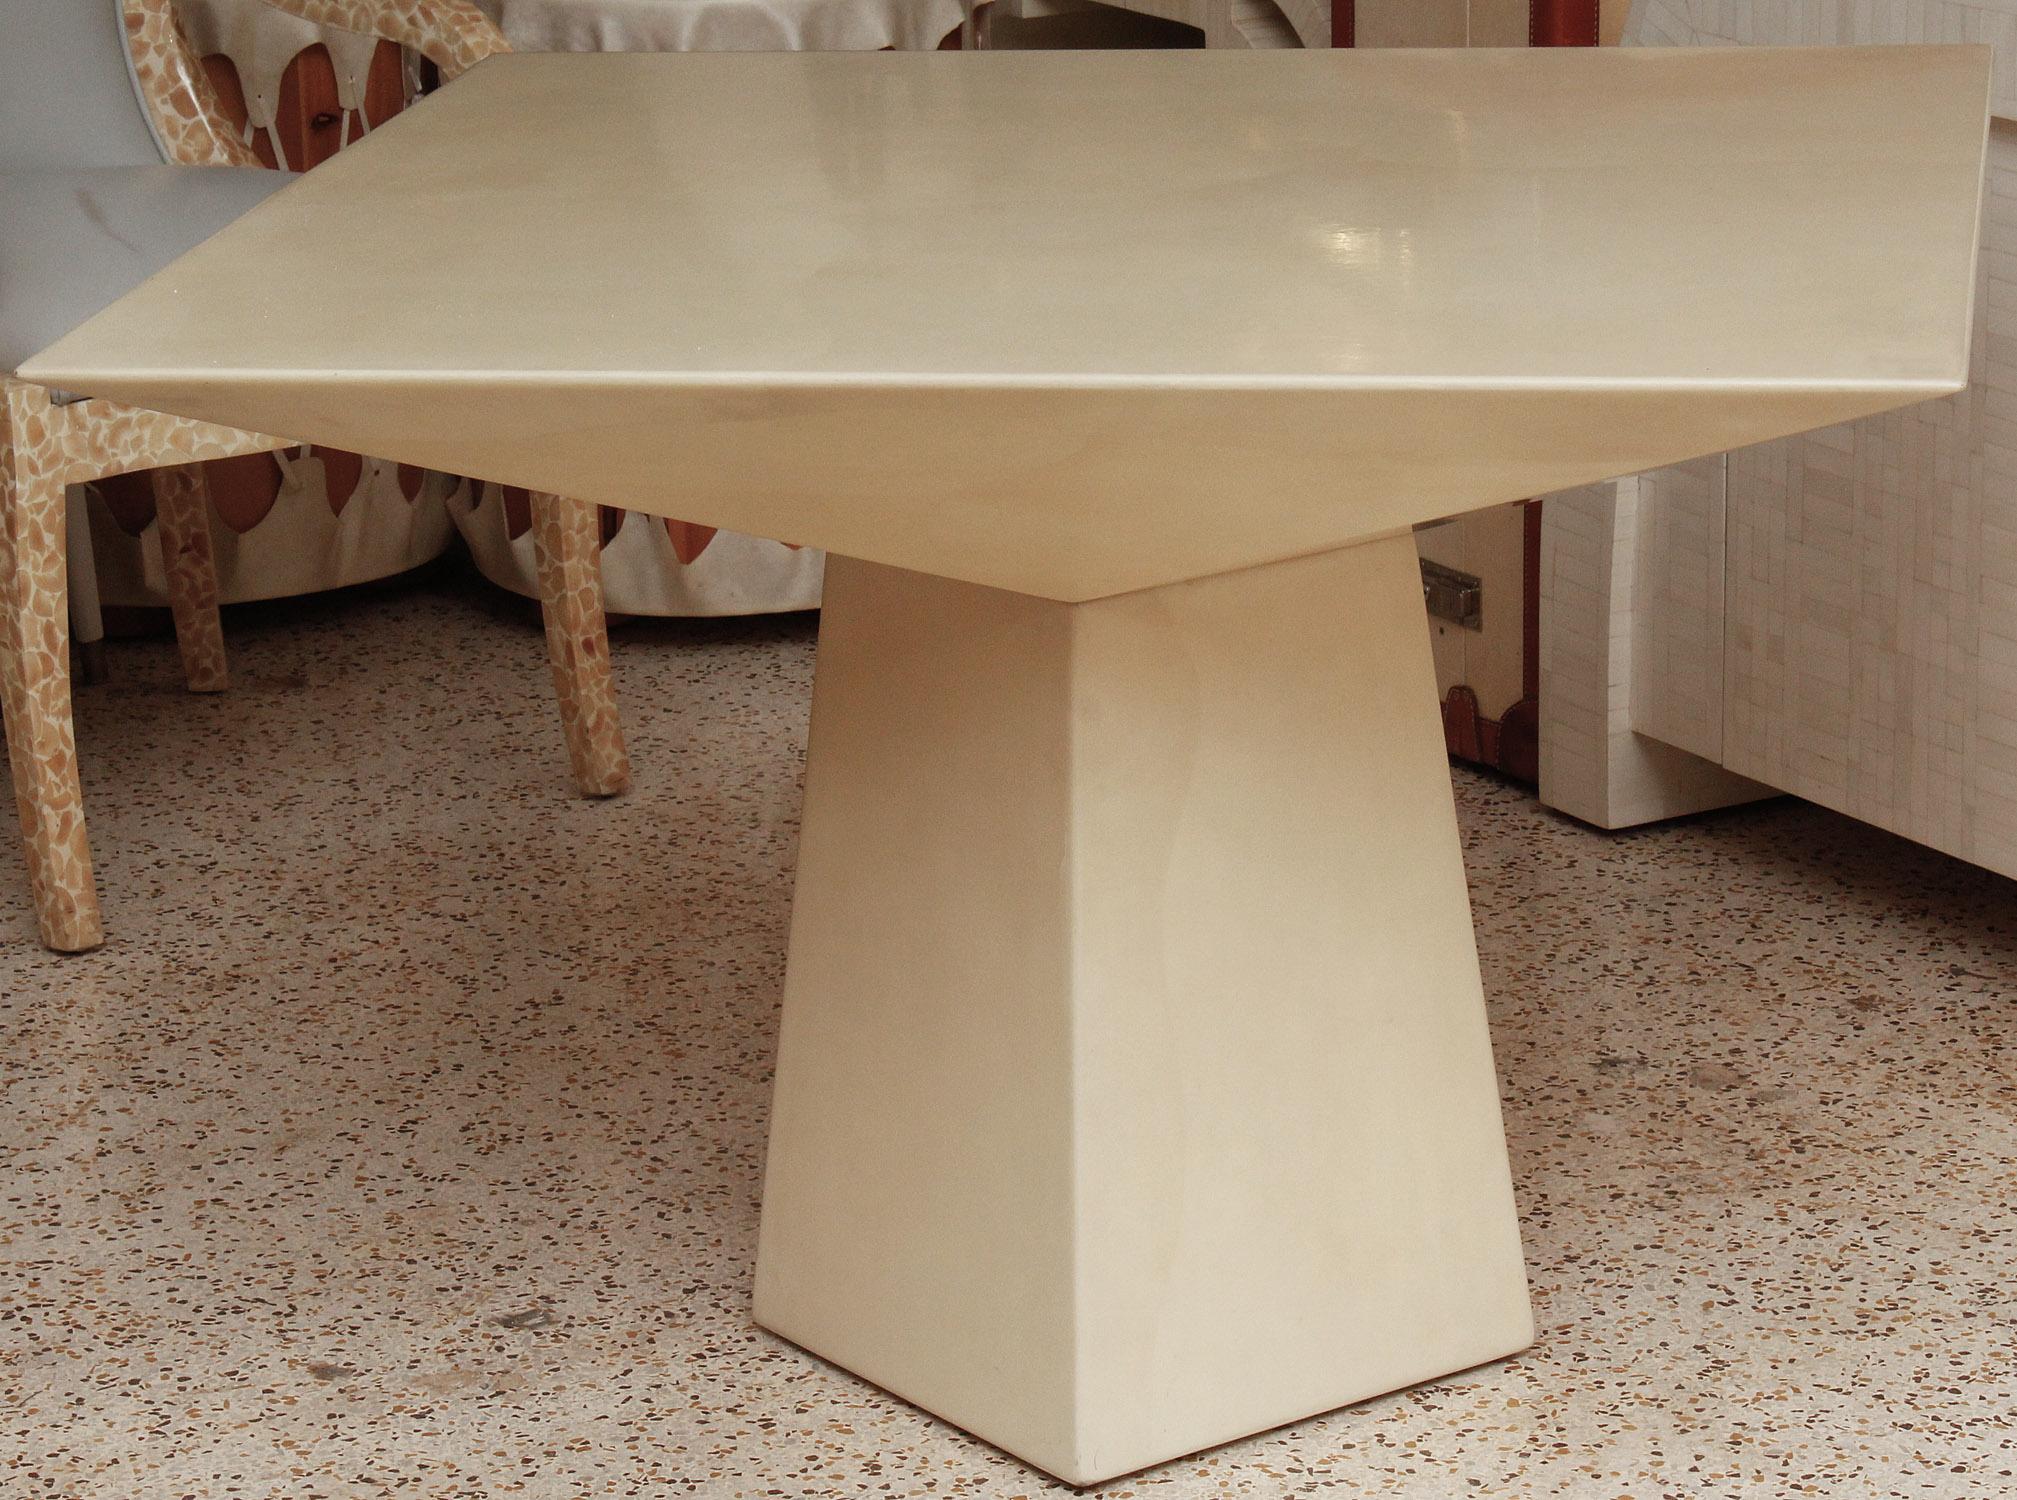 This exceptional lacquered goatskin table by Ron Seff, circa 1980, features a unique multi-faceted design. Suitable as a center table, game table, or intimate dining table.